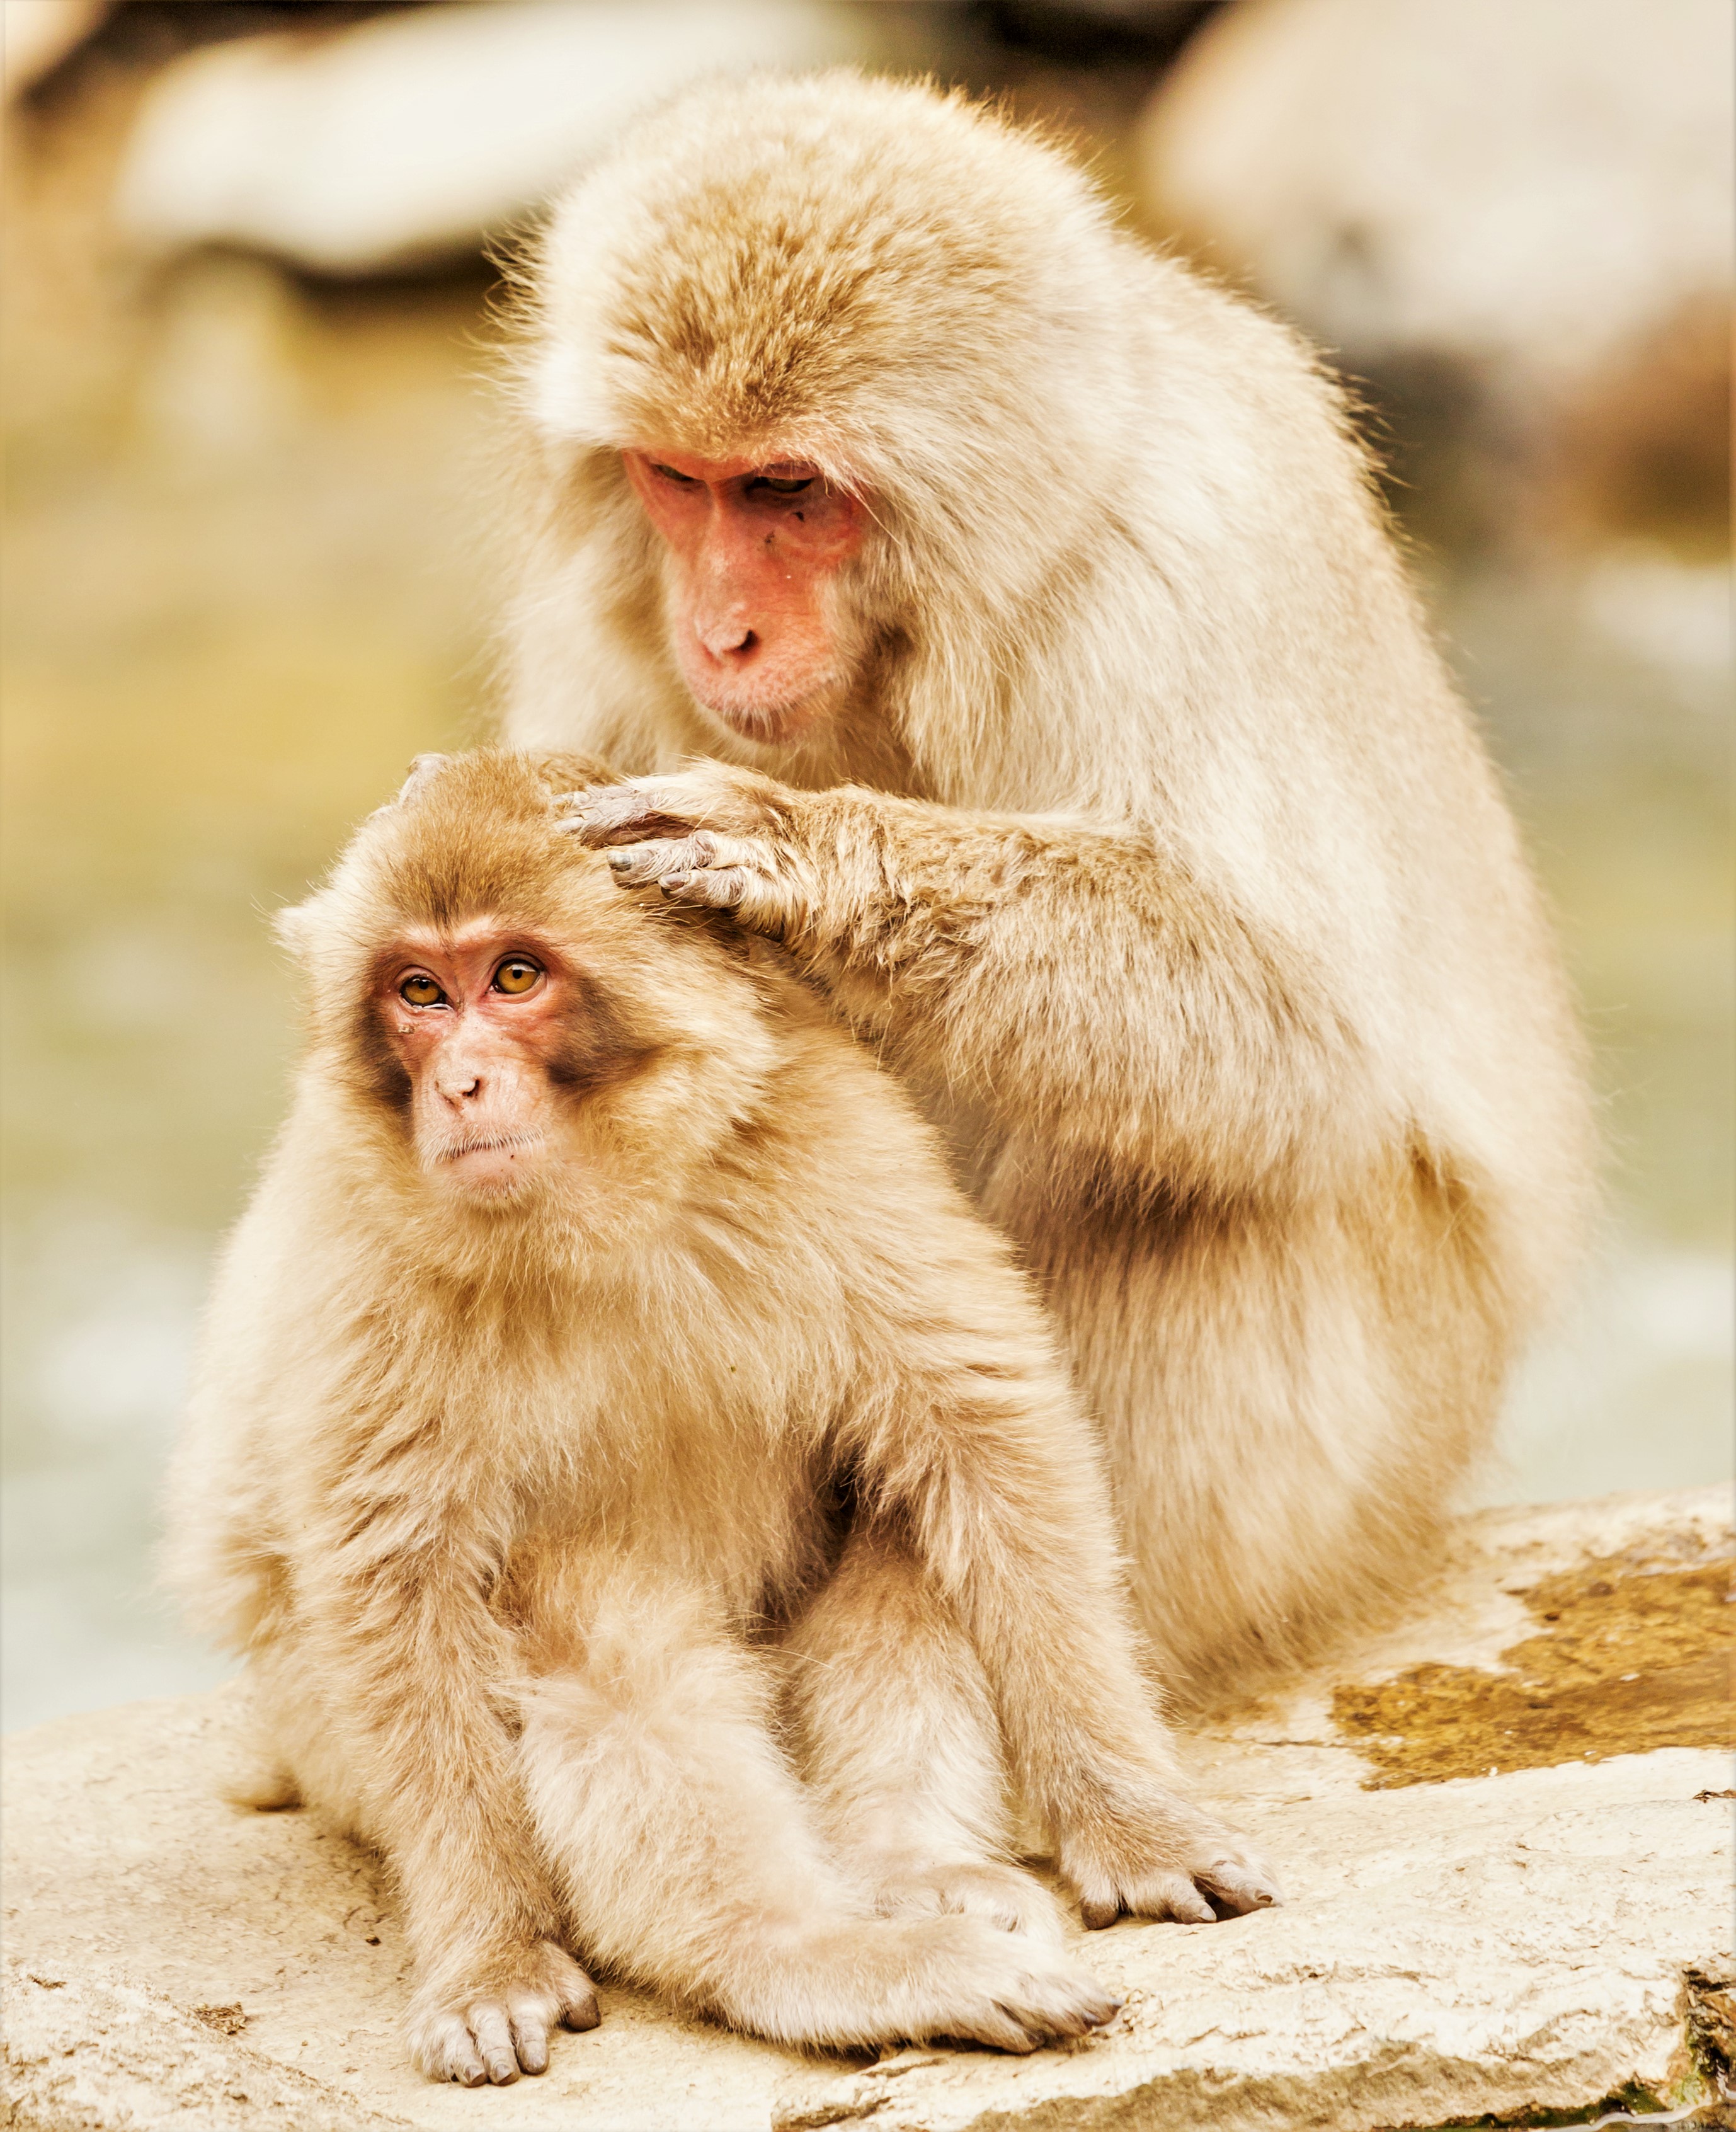 Japanese macaque - Wikipedia